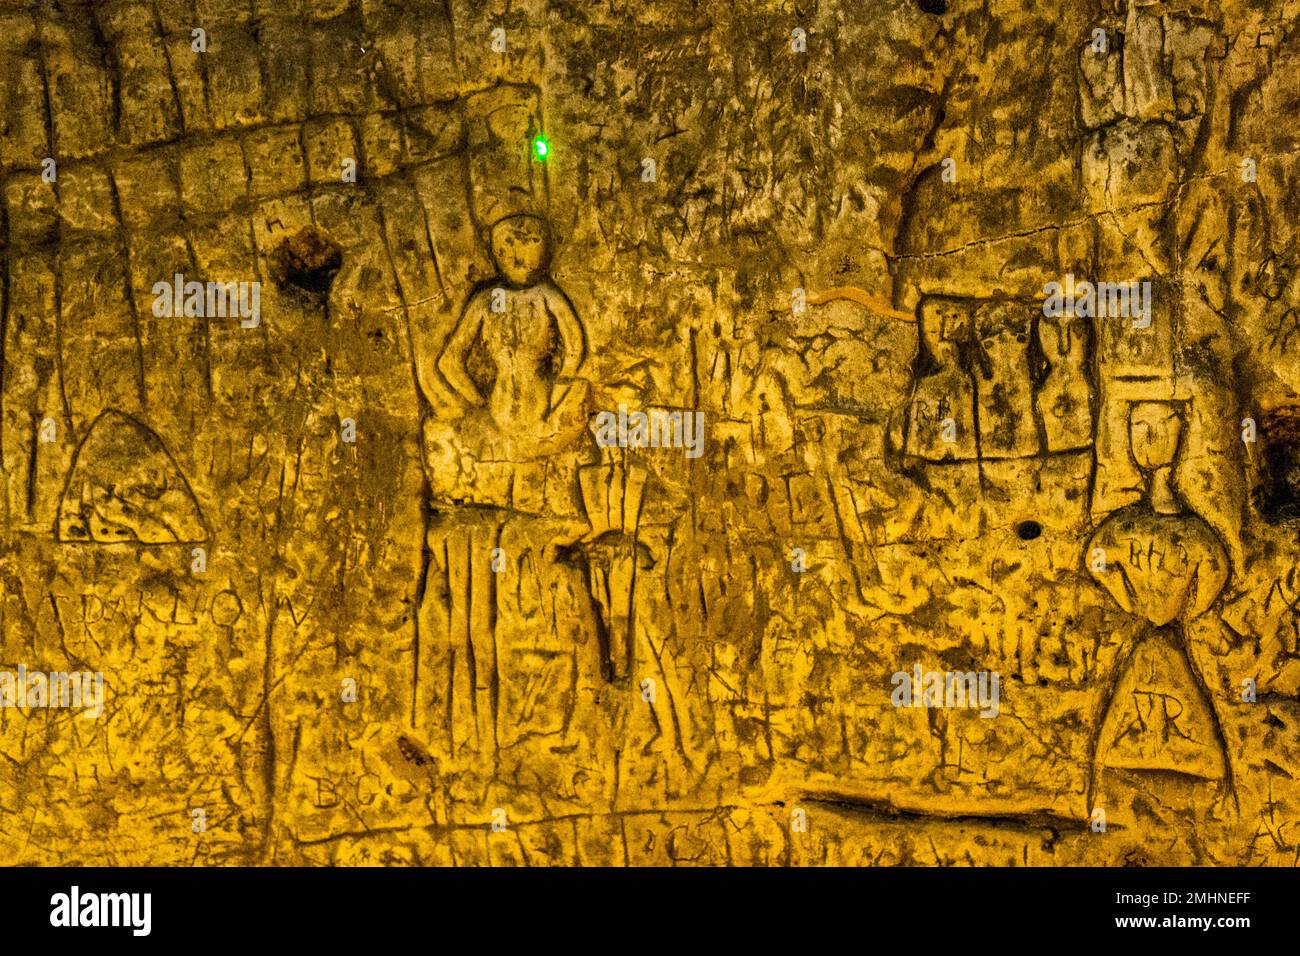 A laser pointer is used to explain the mysterious carvings in Royston Cave to groups of visitors. Royston Cave in Katherine's Yard, Melbourn Street, Royston, England Stock Photo